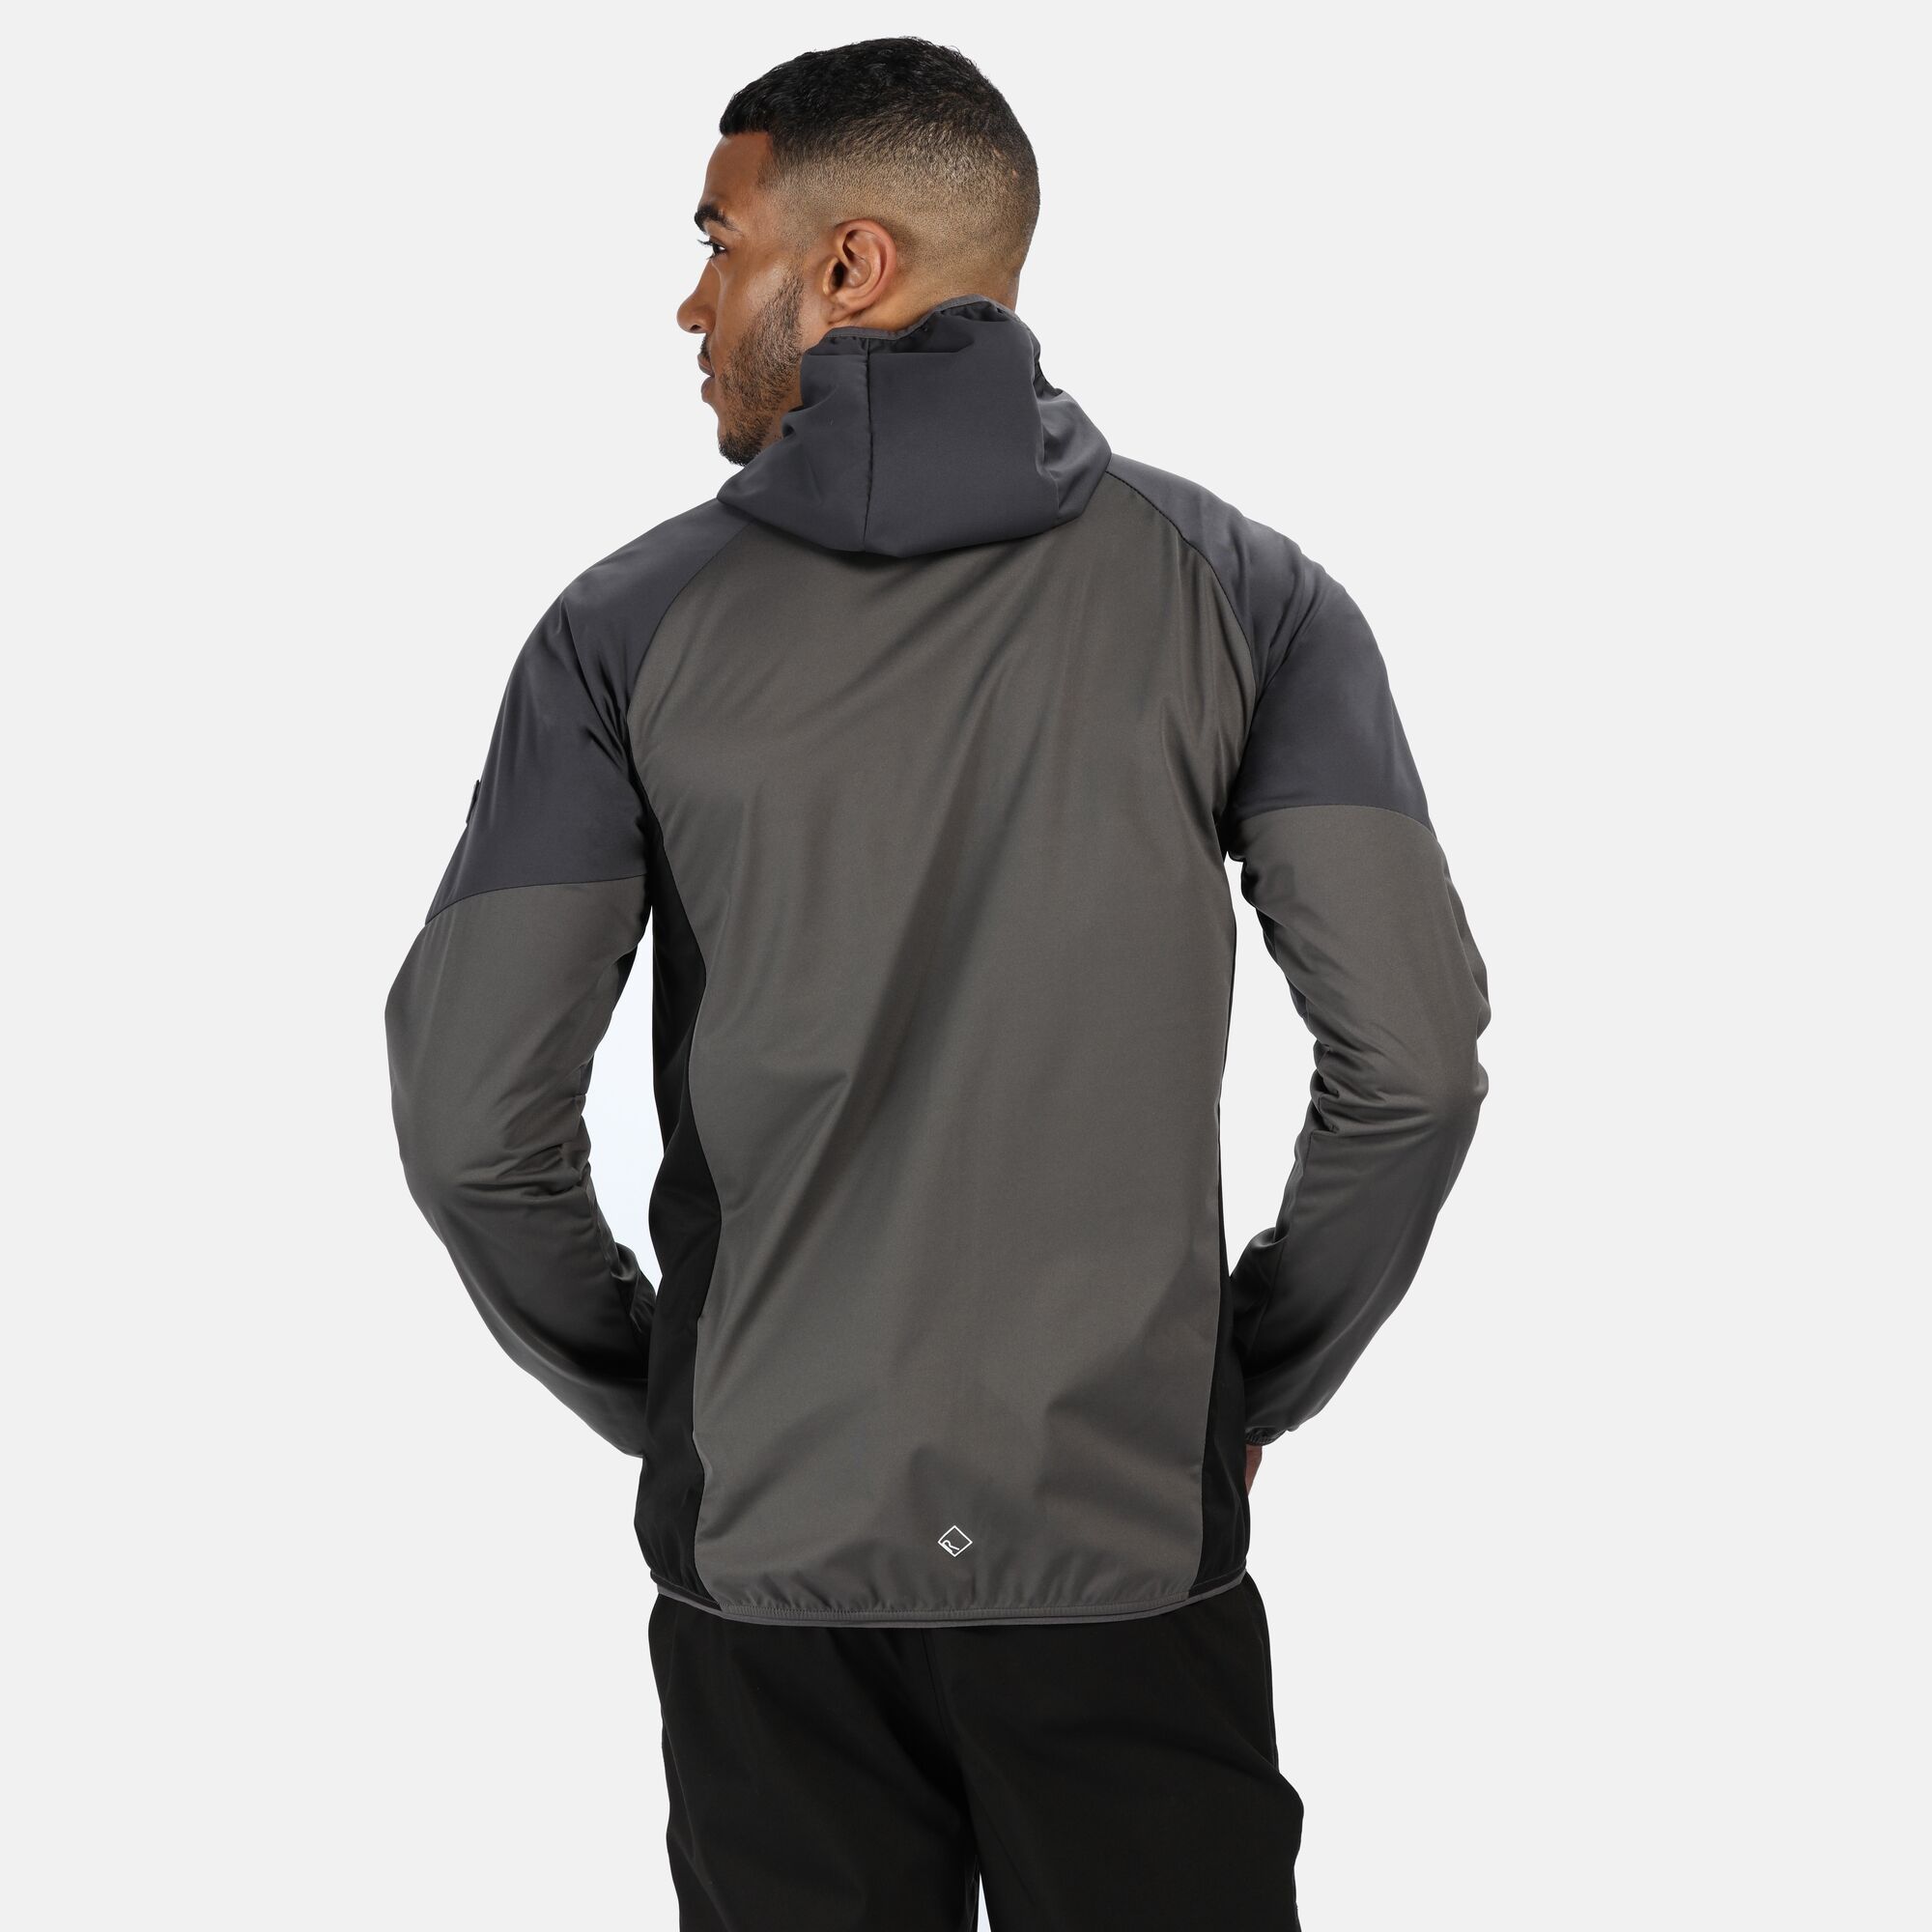 Material: 100% polyester. Lightweight Softshell XPT stretch fabric. Breathability rating 10,000g/m2/24hrs. Waterproof and windproof membrane fabric. Durable water repellent finish. Grown on hood with rear adjuster. Inner zip guard. Articulated sleeves for enhanced range of movement. 2 zipped lower pockets and 1 zipped chest pocket. Mesh lined pockets for breathability. Stretch binding to hood opening, cuffs and hem.